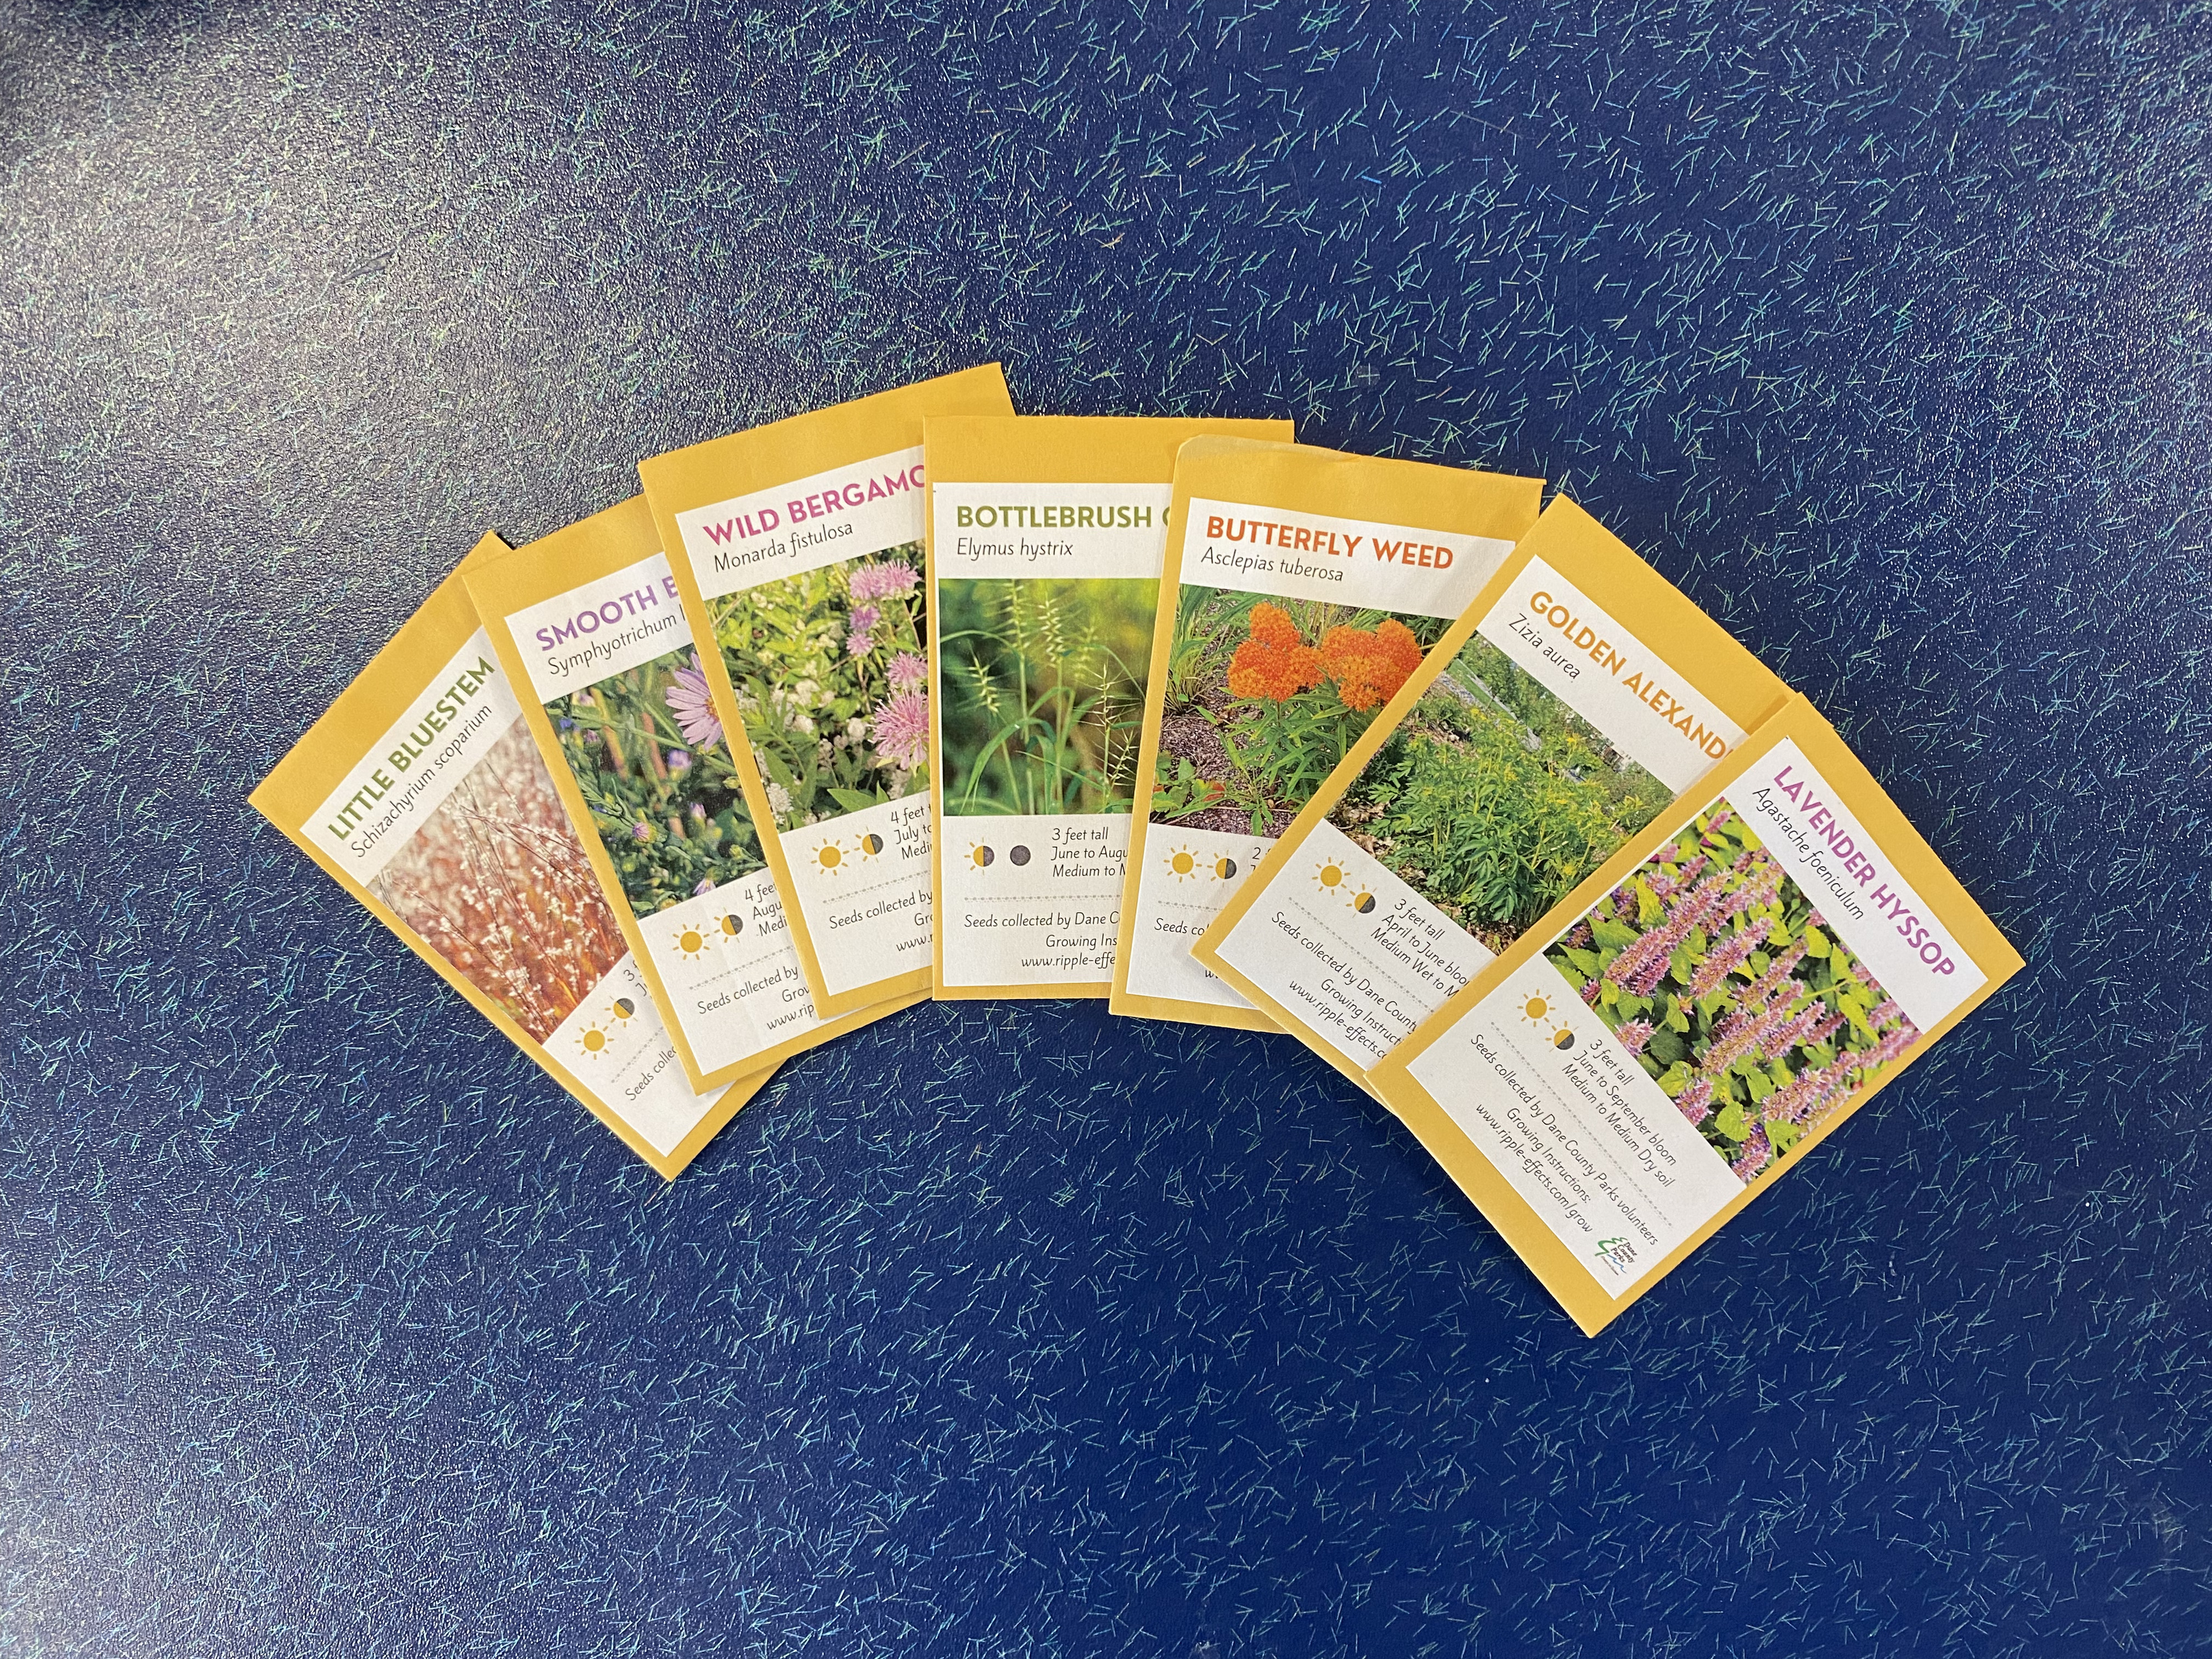 Madison Public Library Seed Library gives away free seeds twice a year